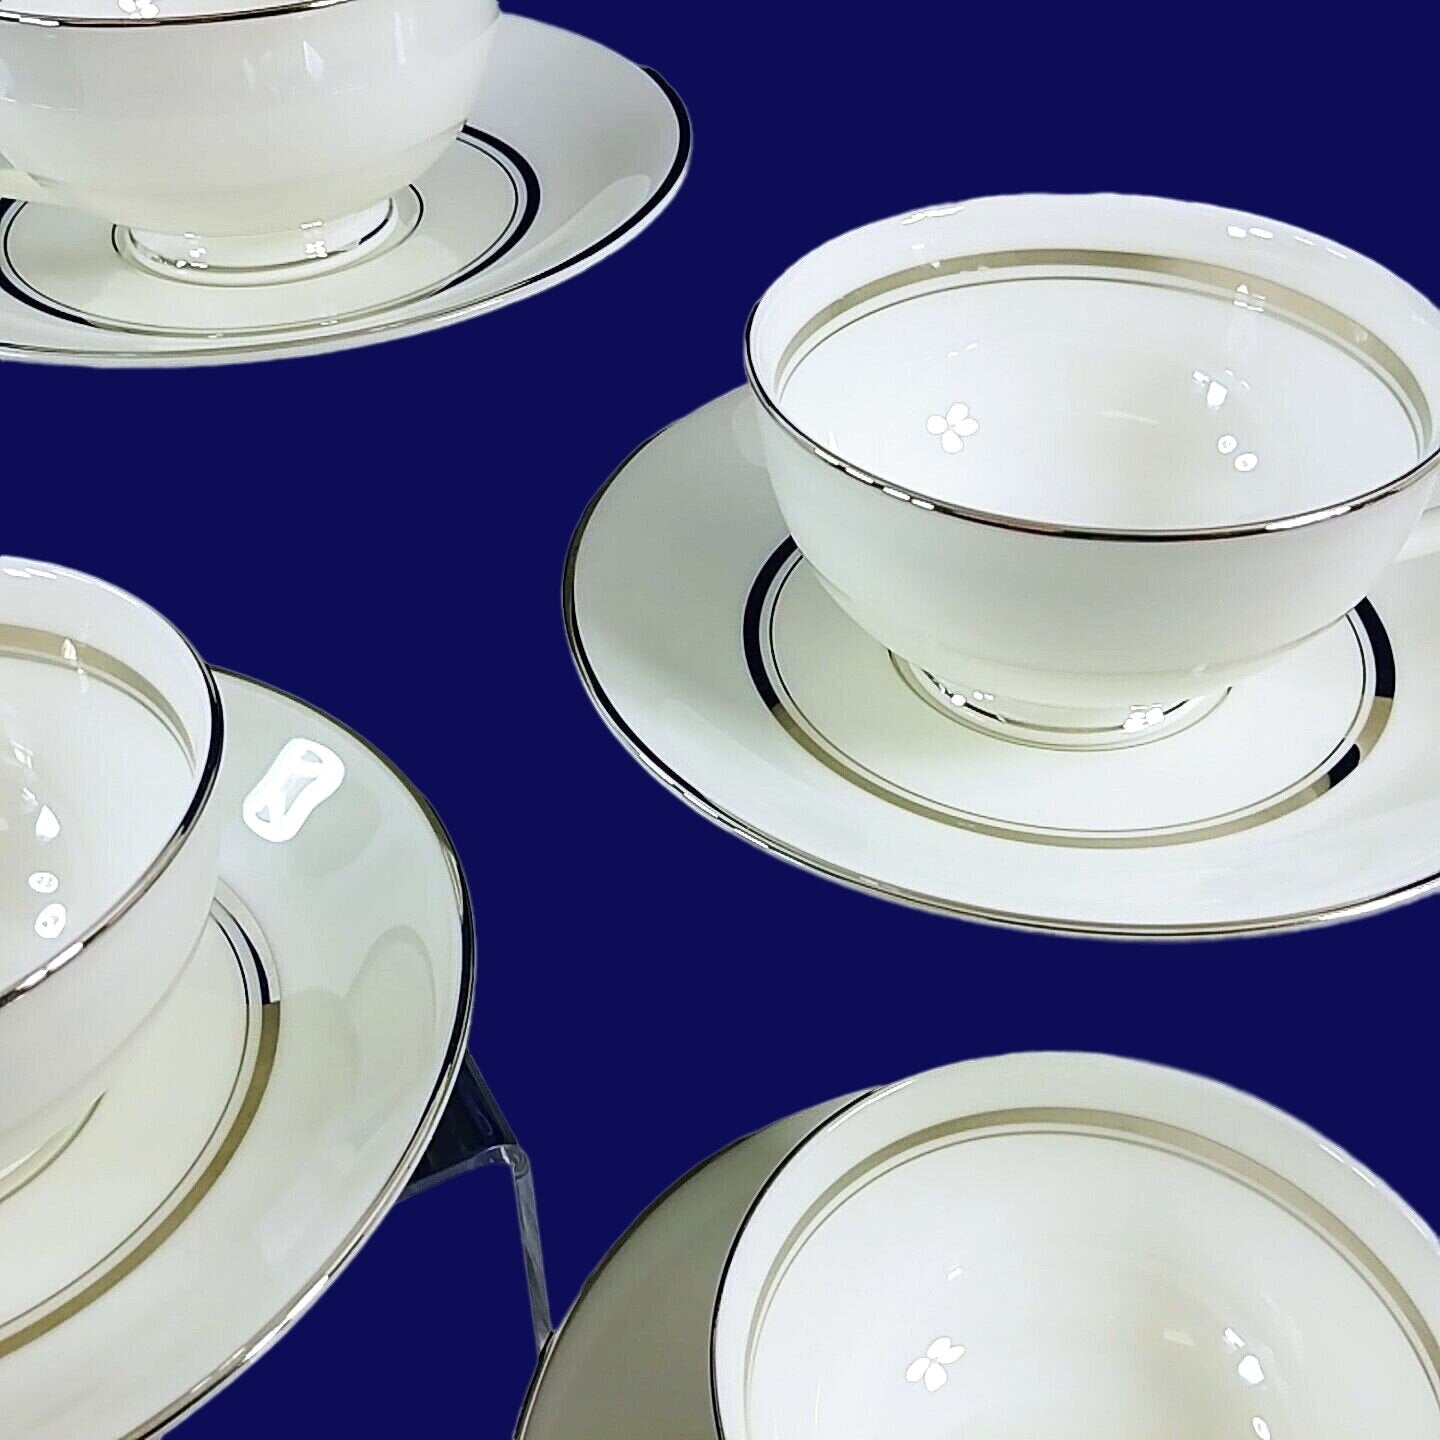 Cup Saucer Set Imperial Fukagawa Porcelain China Silver Trim 4 Cups 4 Saucers